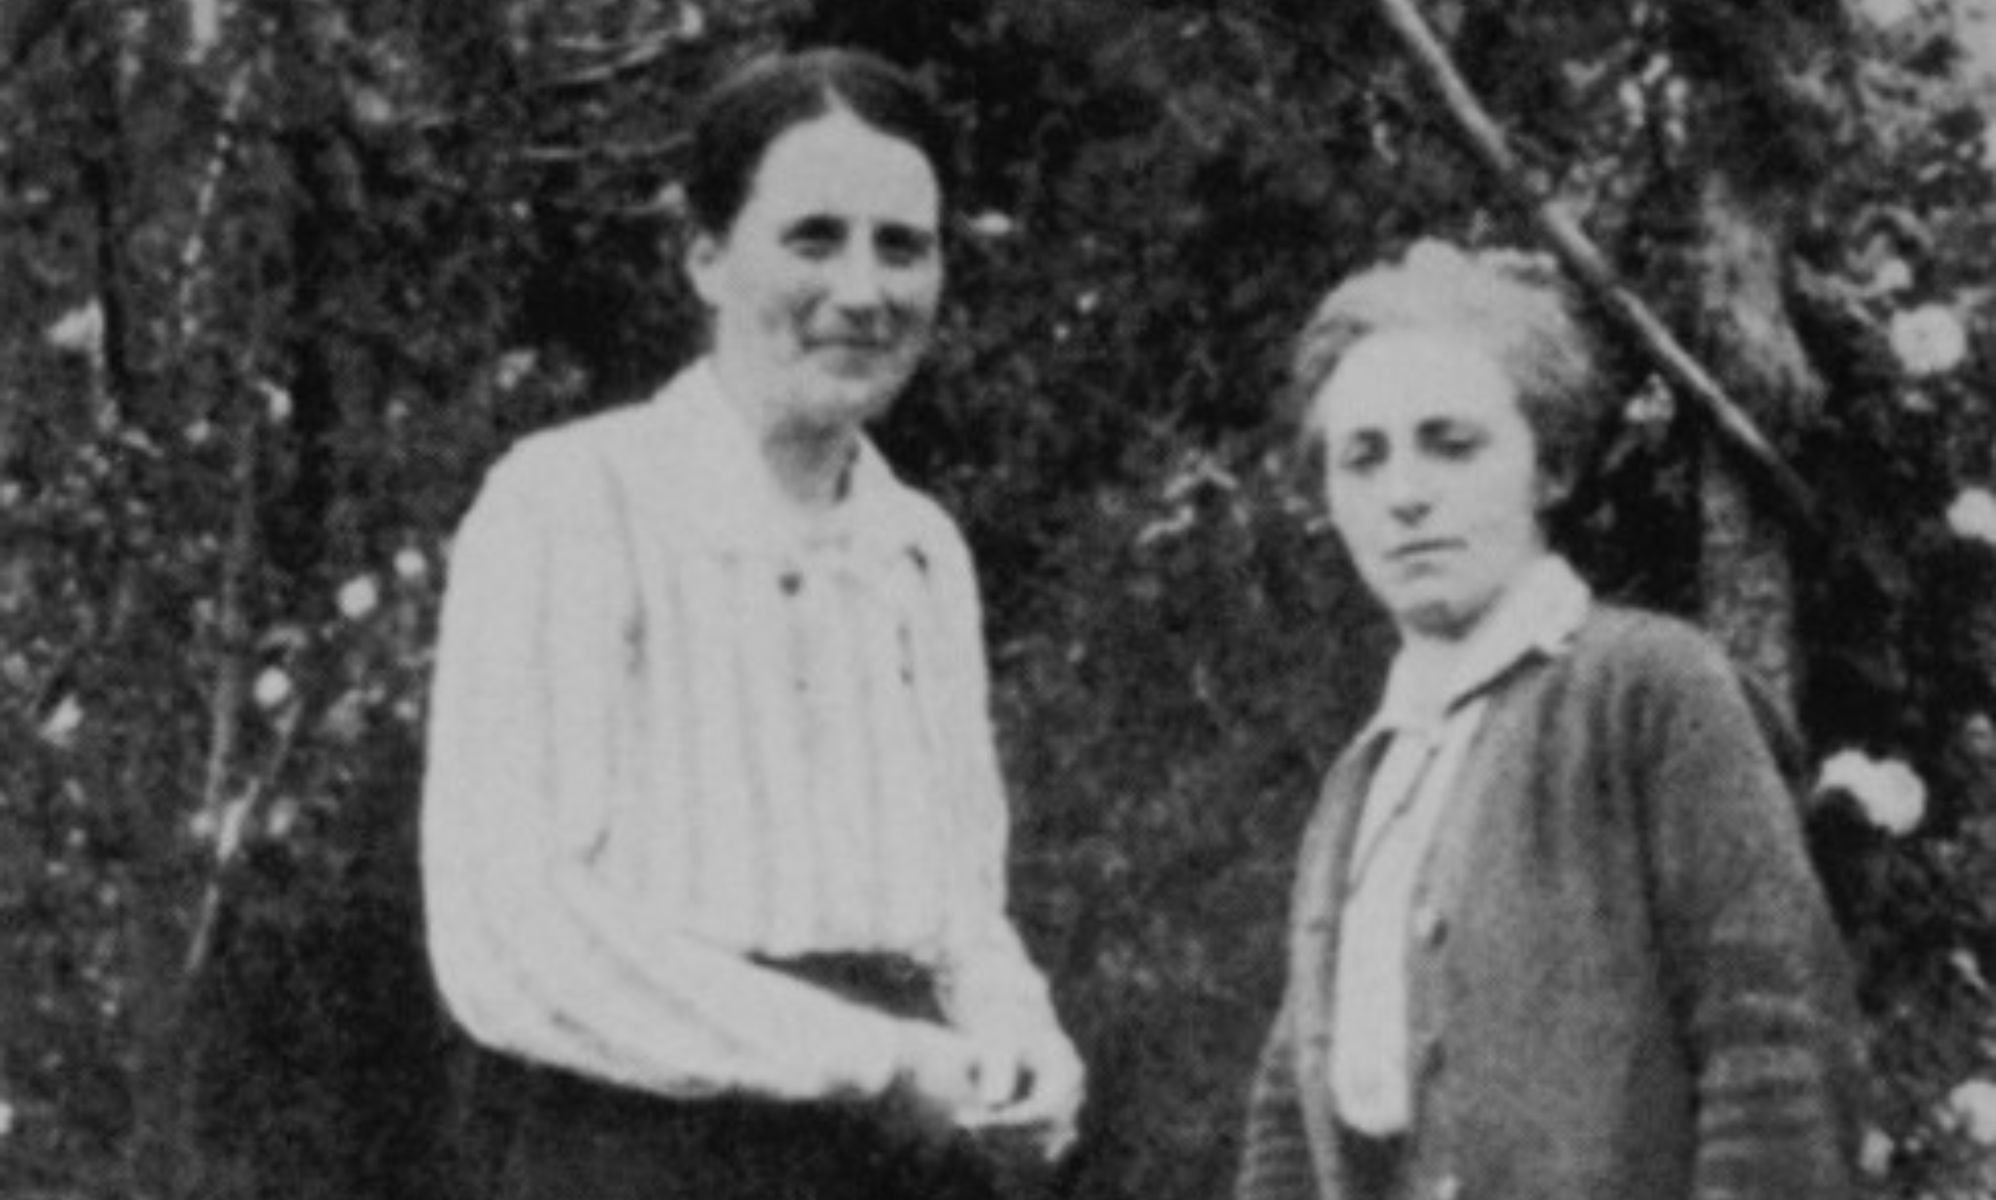 How a lesbian couple’s contribution to Ireland’s Easter Rising was scrubbed from history